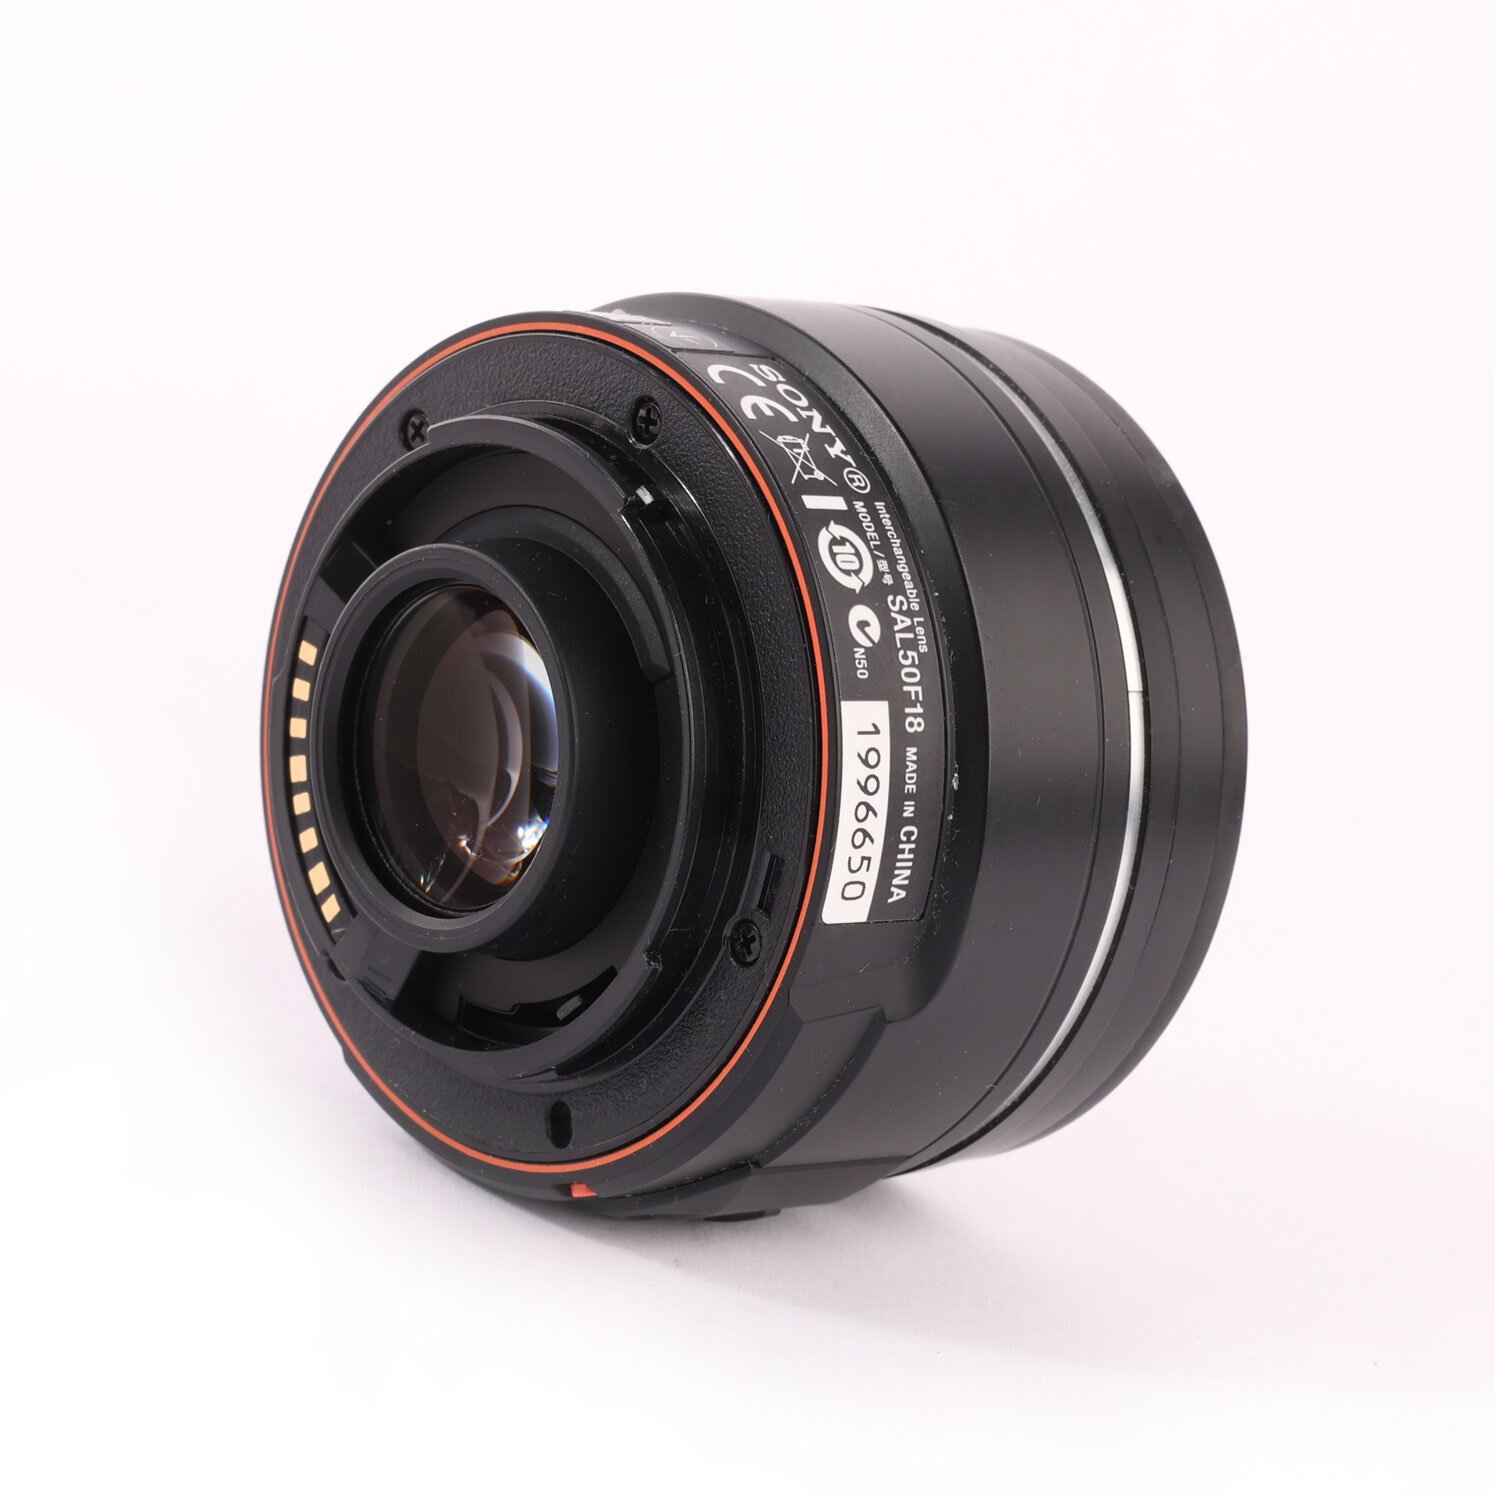 Sony DT1.8/50 SAM A Mount